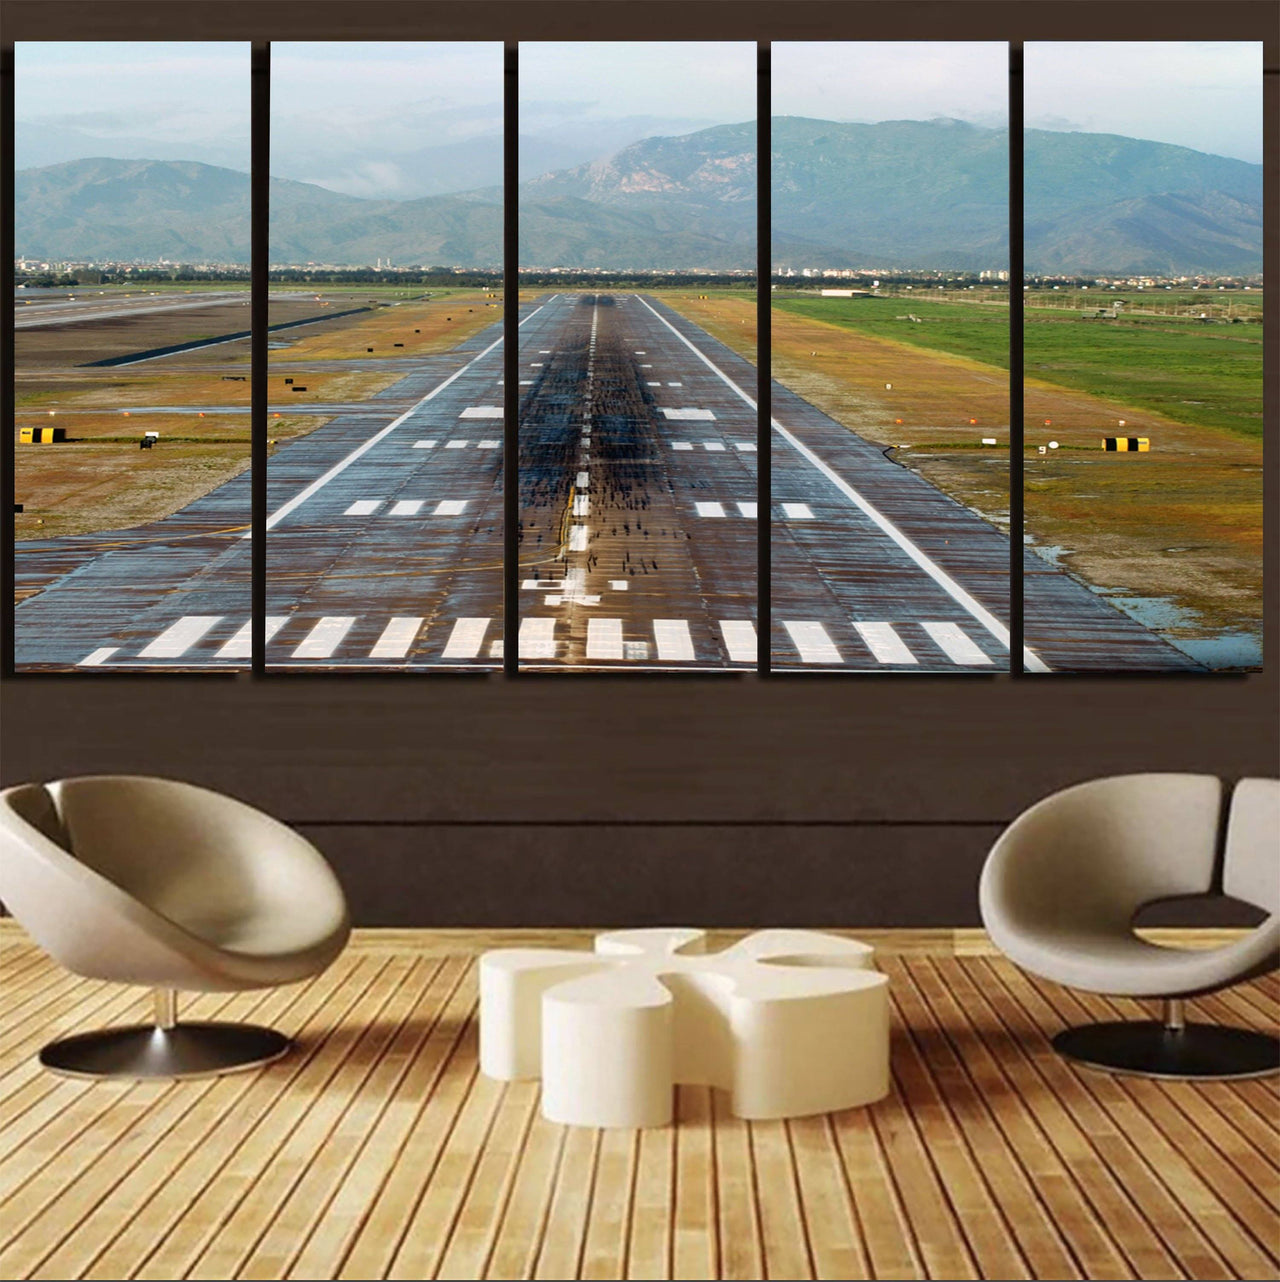 Amazing Mountain View & Runway Printed Canvas Prints (5 Pieces) Aviation Shop 